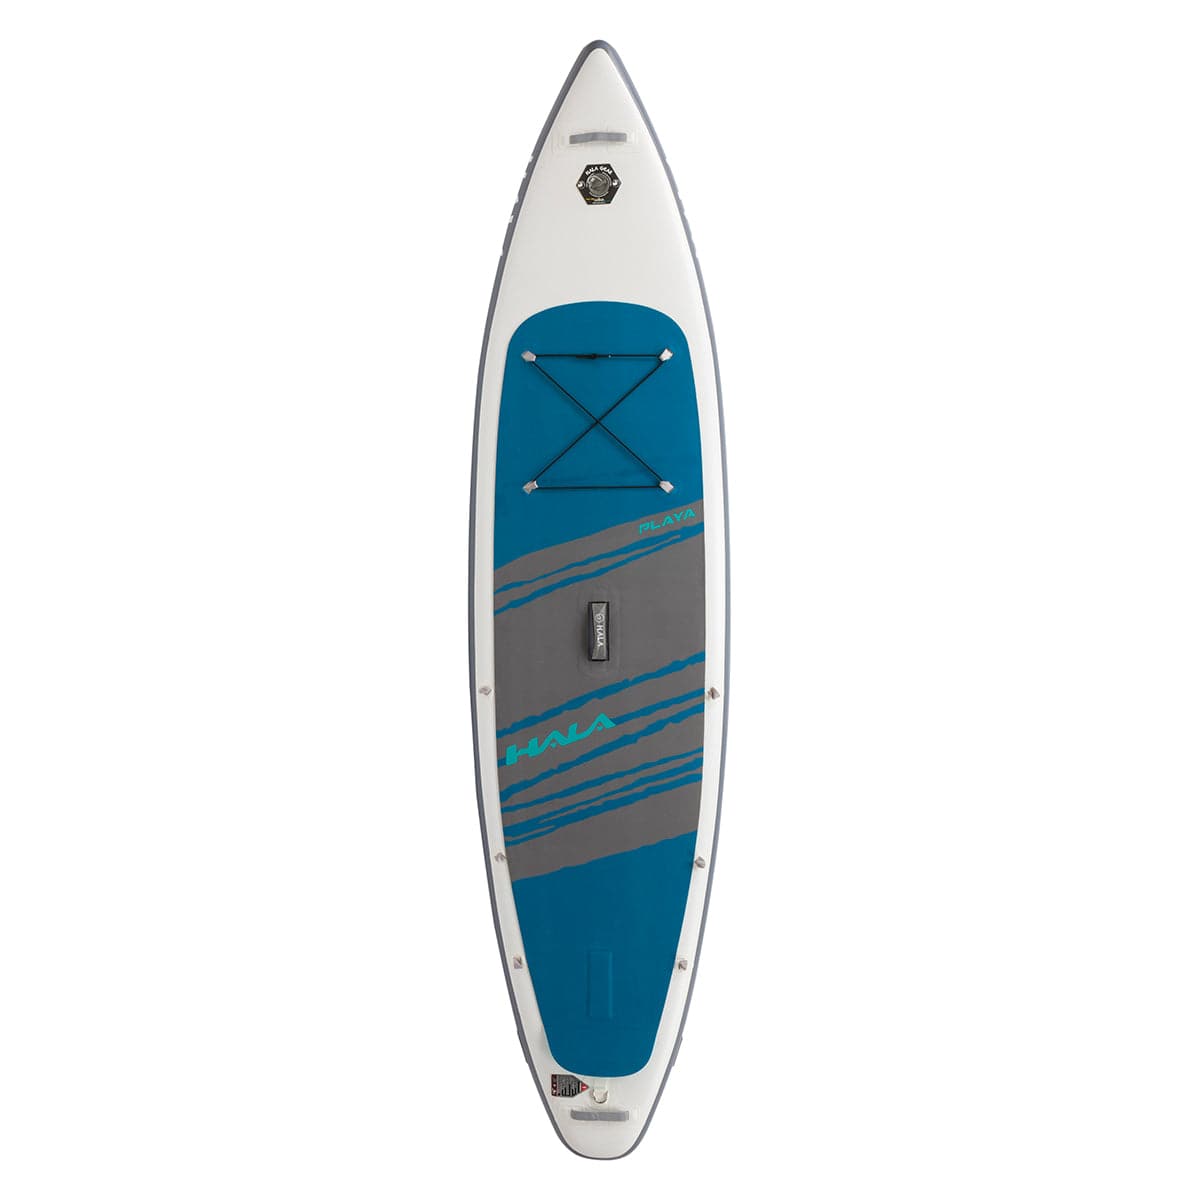 Featuring the Playa 11' Inflatable SUP inflatable sup manufactured by Hala shown here from one angle.